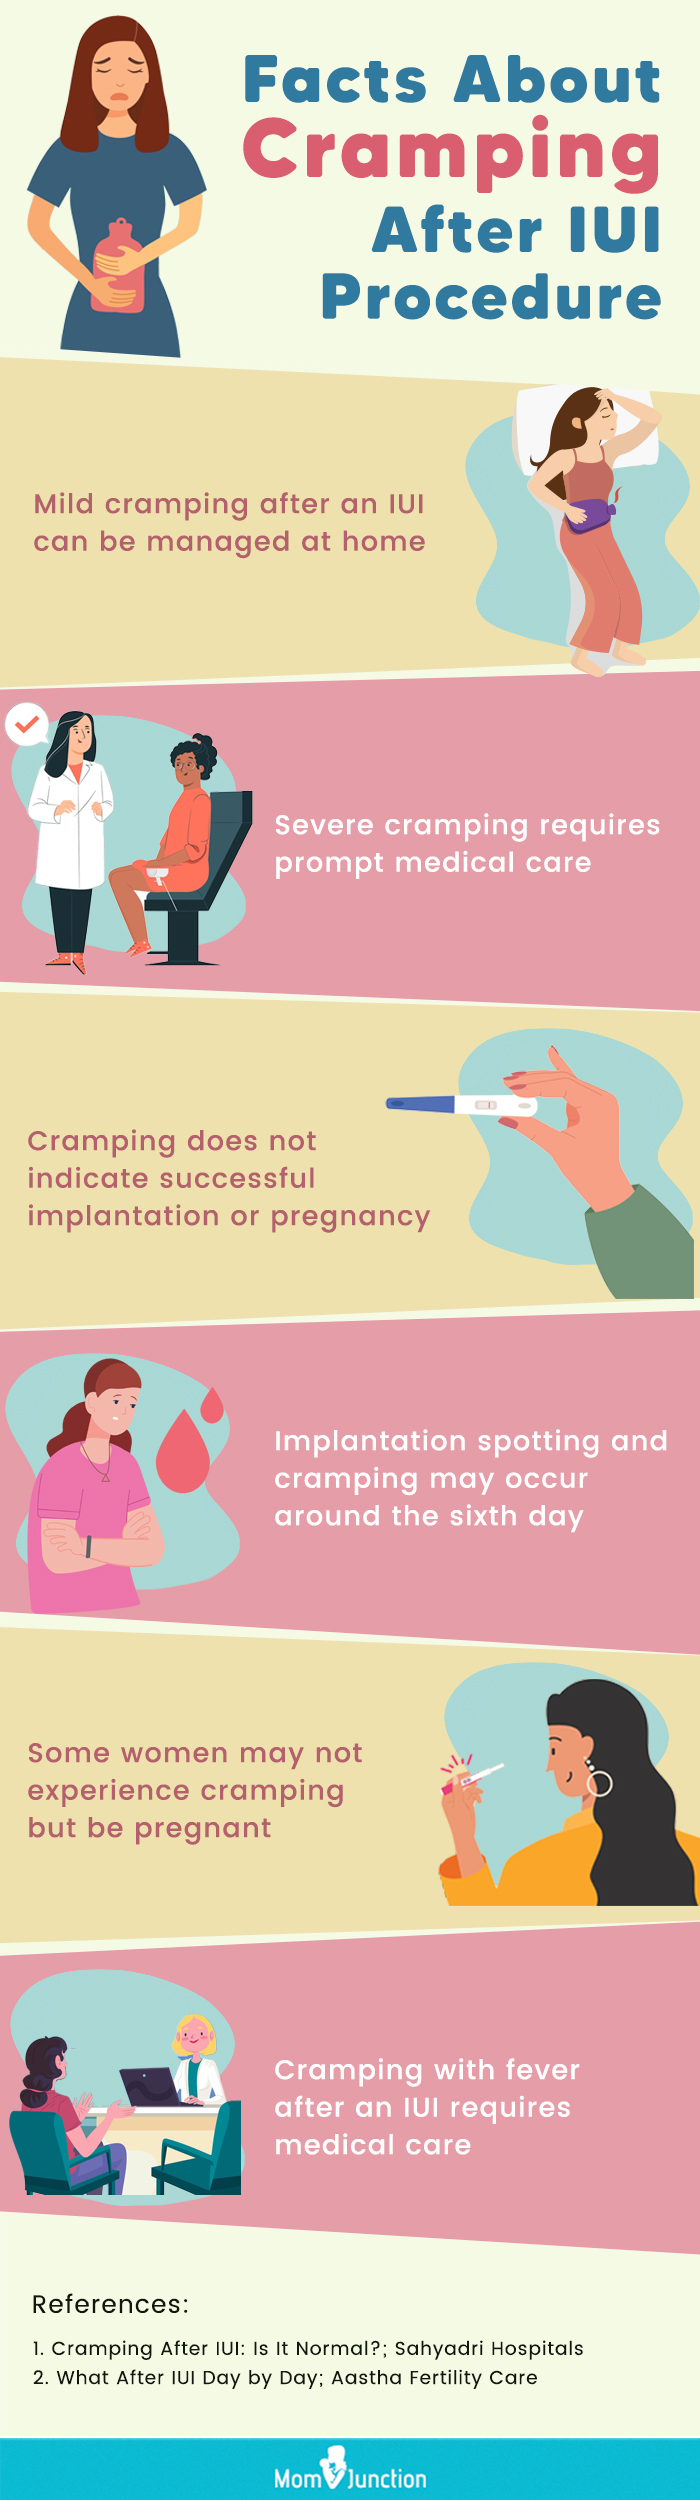 facts about cramping after iui procedure [infographic]